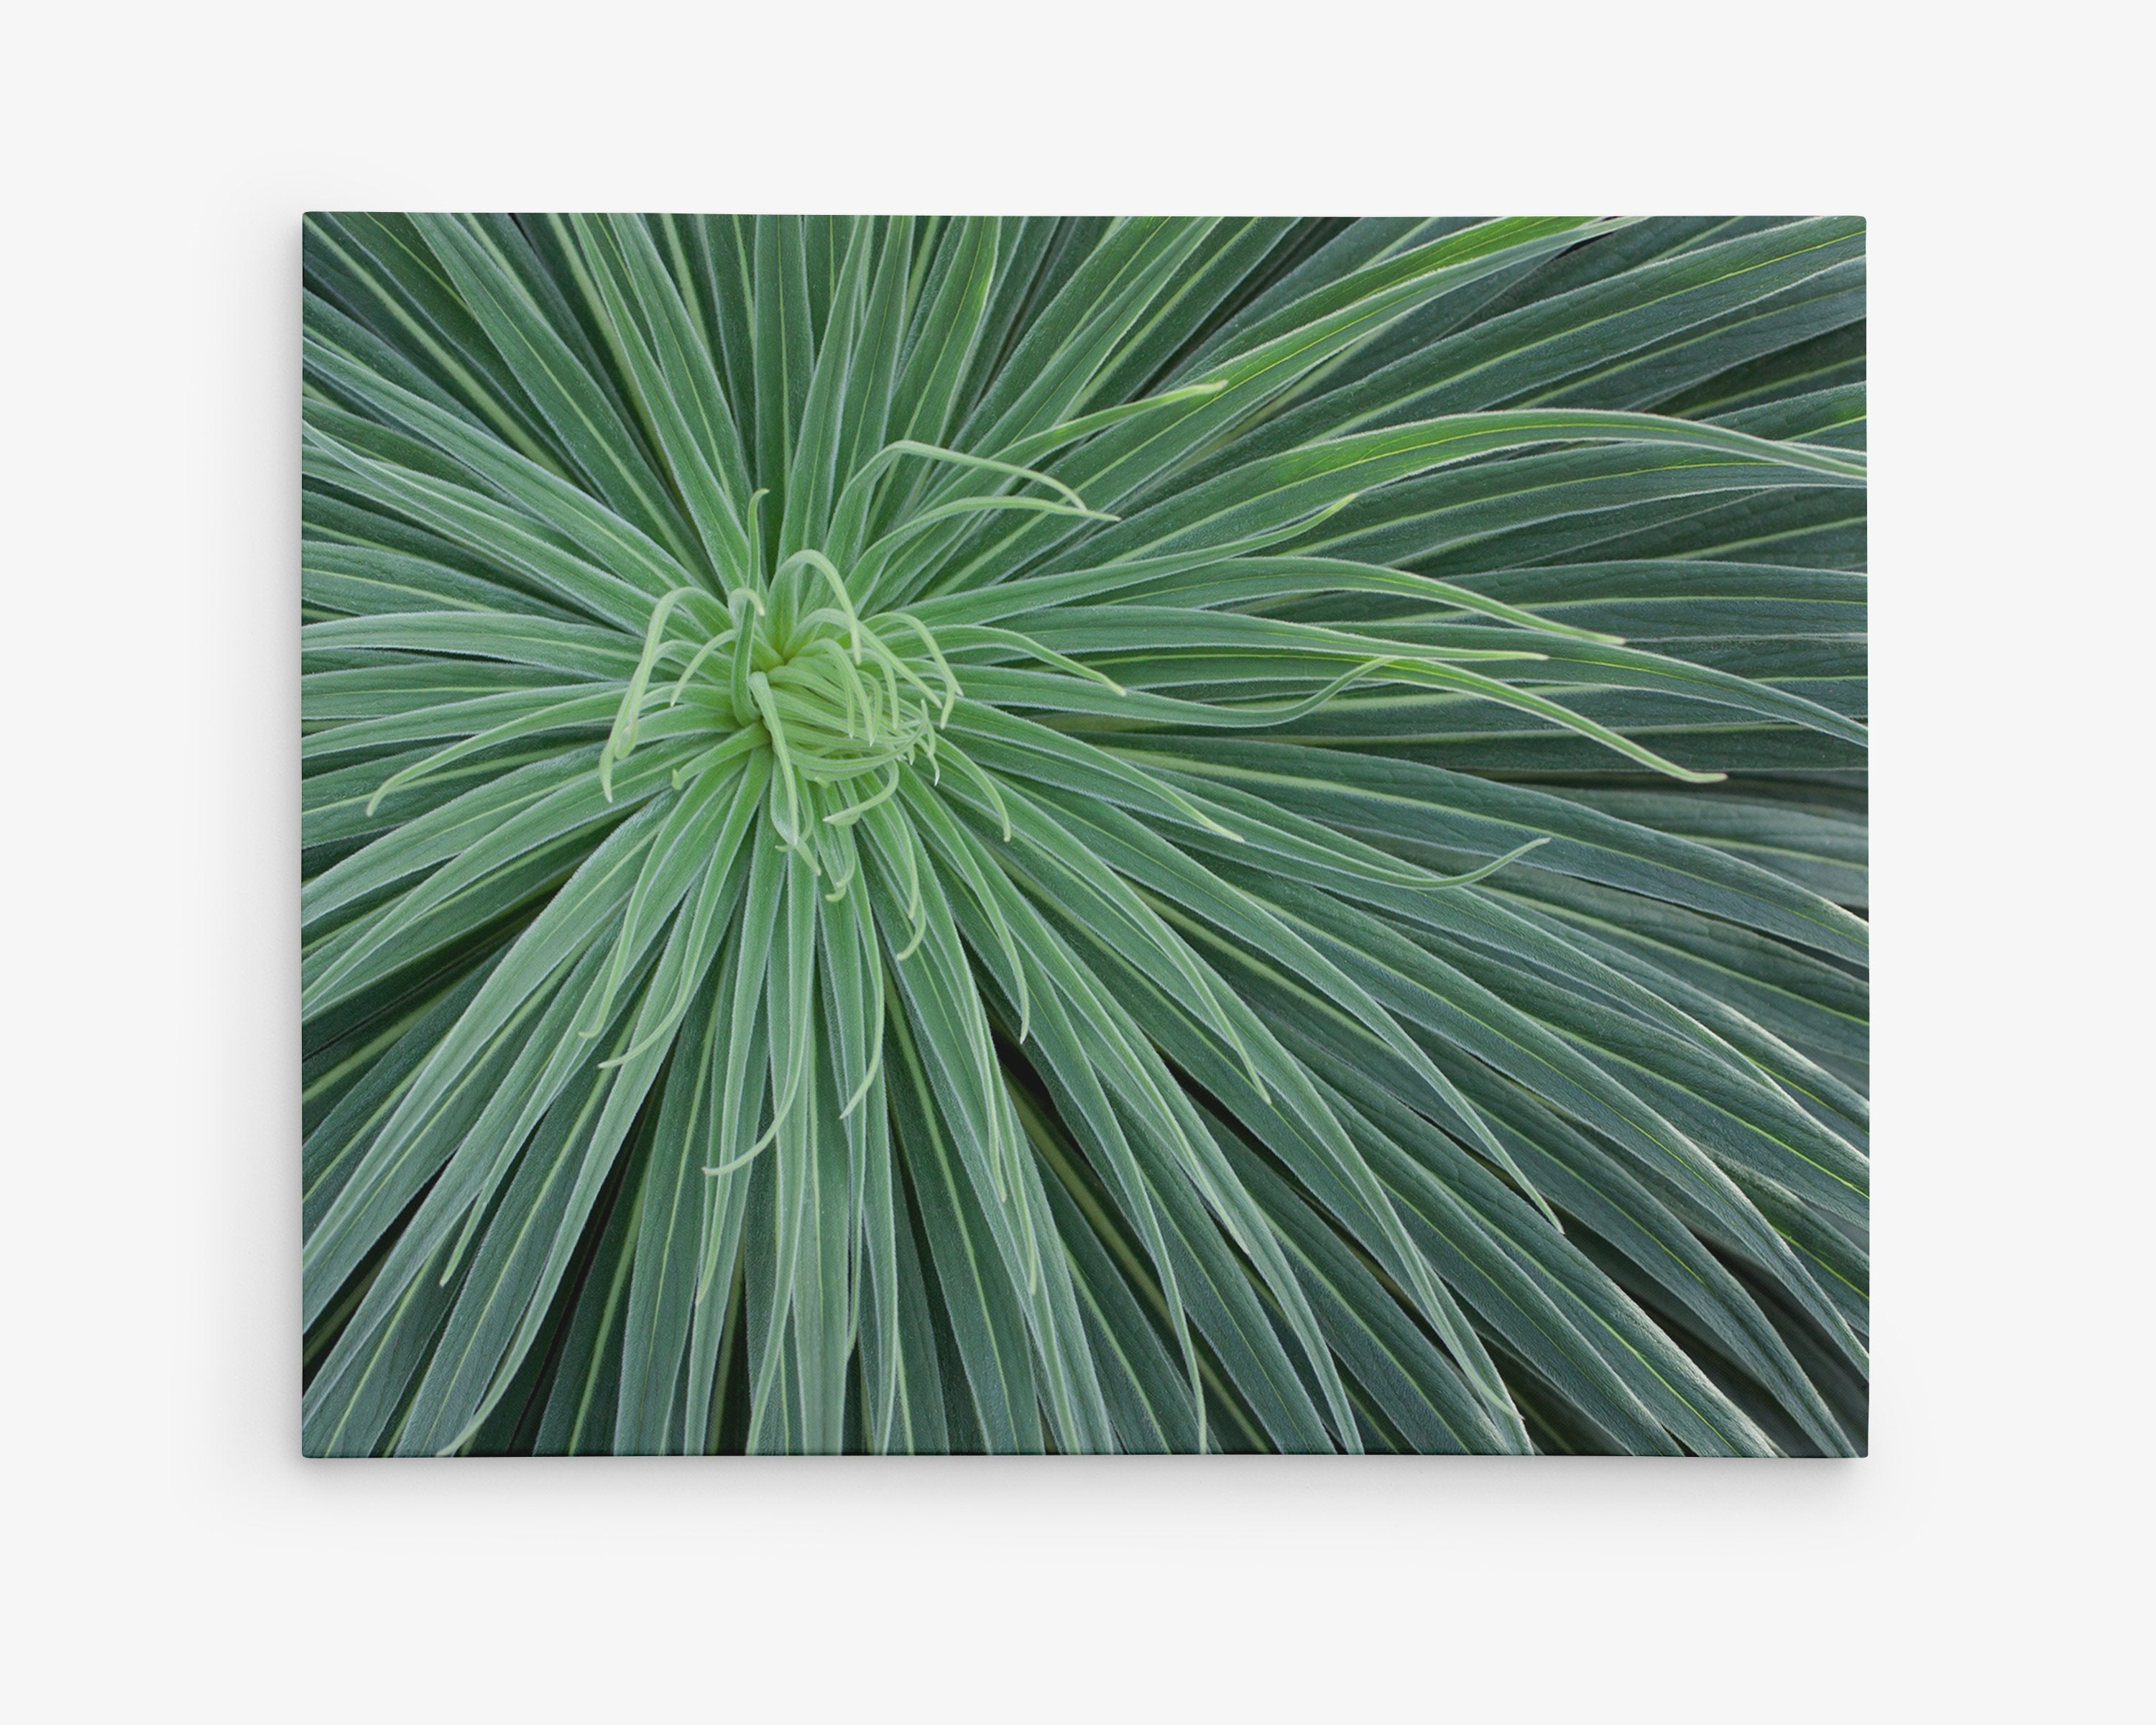 Close-up image of Offley Green's 'Desert Fireworks' Abstract Green Botanical Canvas Wall Art, with long, thin, spiky leaves radiating from the center, showing detailed textures and natural patterns.